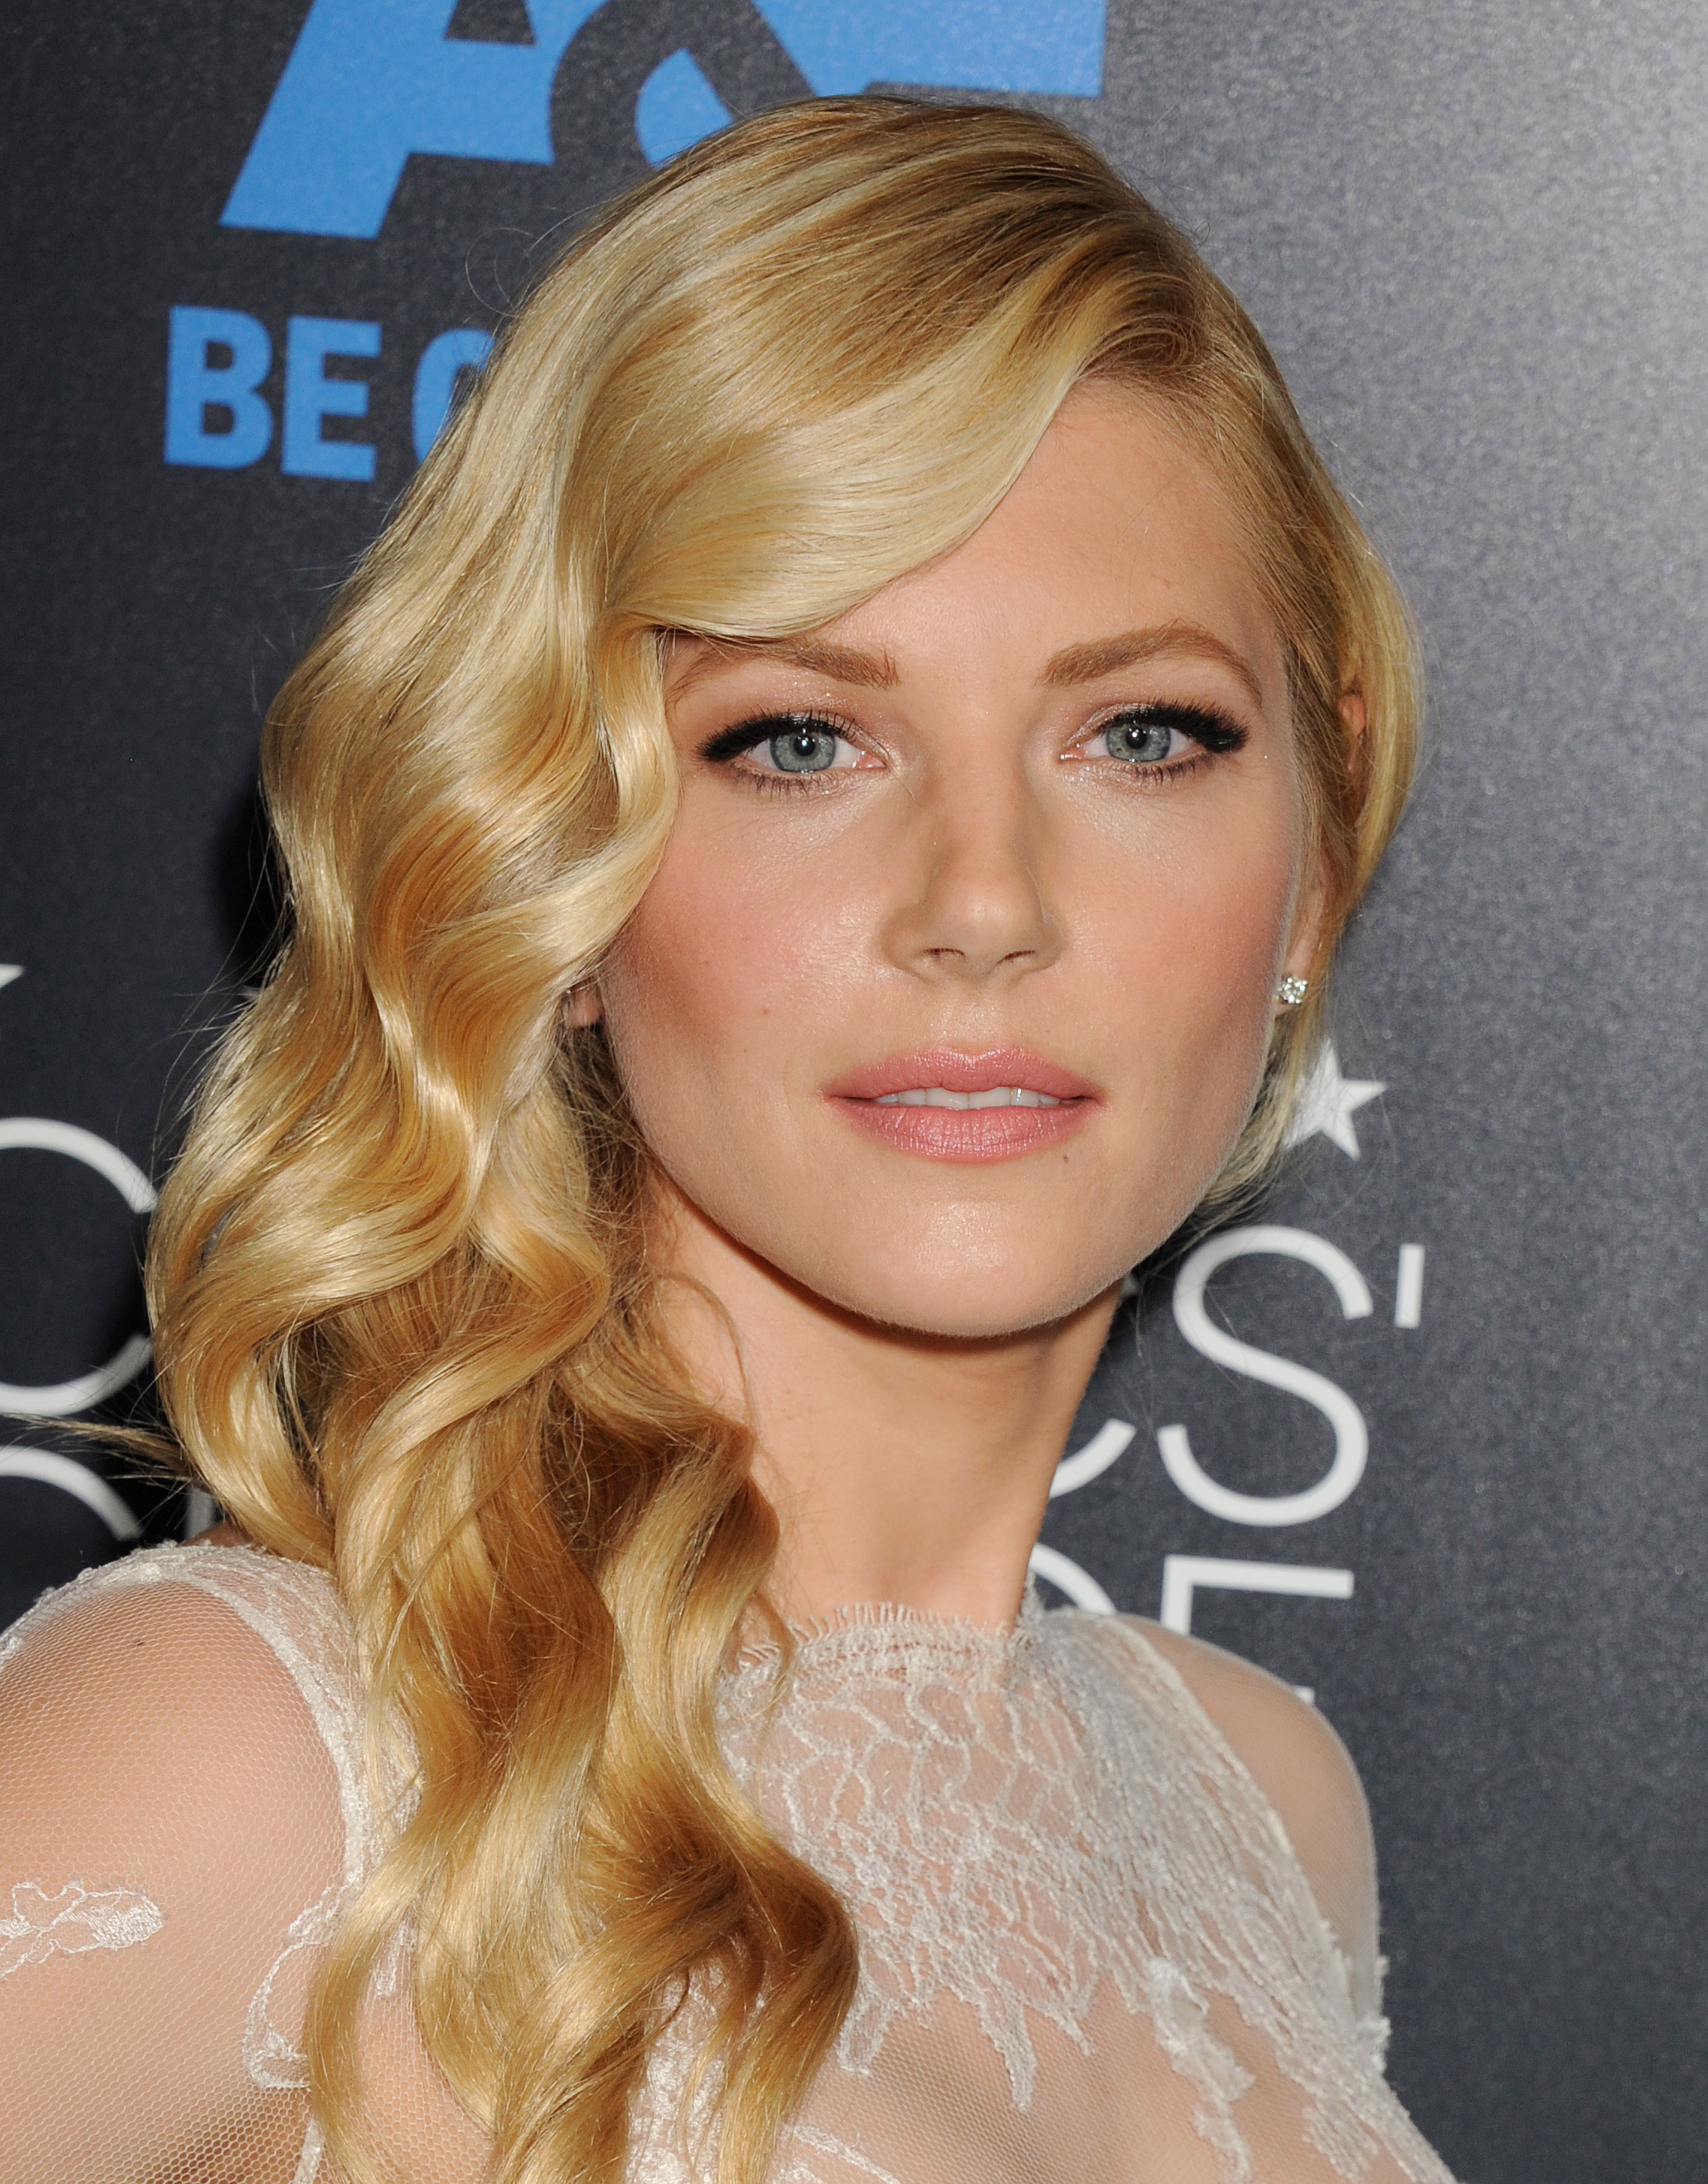 Actress Katheryn Winnick attends the 5th annual Critics' Choice Television Awards at The Beverly Hilton Hotel on May 31, 2015 in Beverly Hills, California.